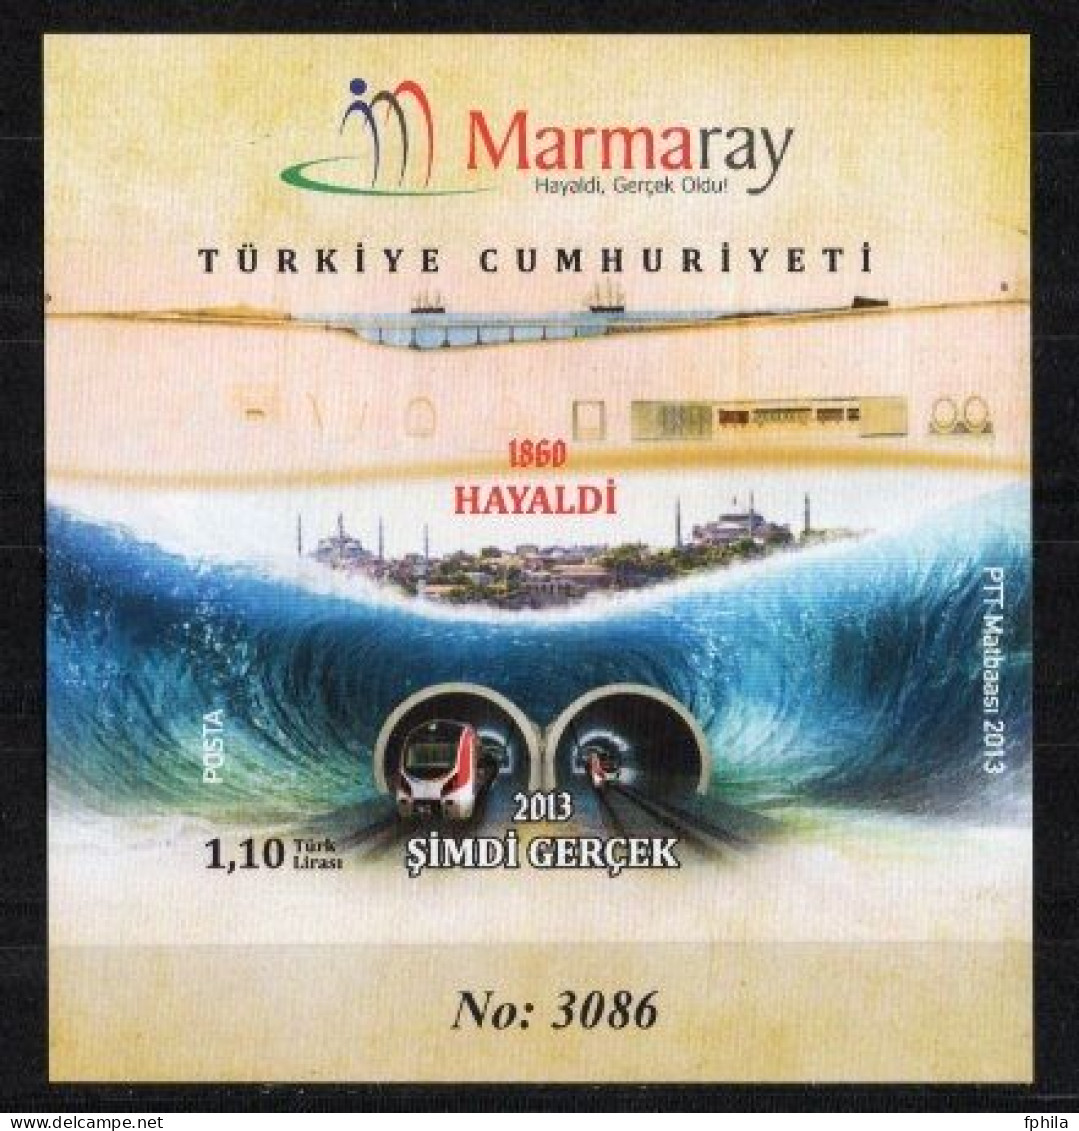 2013 TURKEY MARMARAY WAS ONCE A DREAM, NOW IT'S REALITY - TRAINS , SUBWAY IMPERFORATED SOUVENIR SHEET MNH ** - Blocks & Kleinbögen